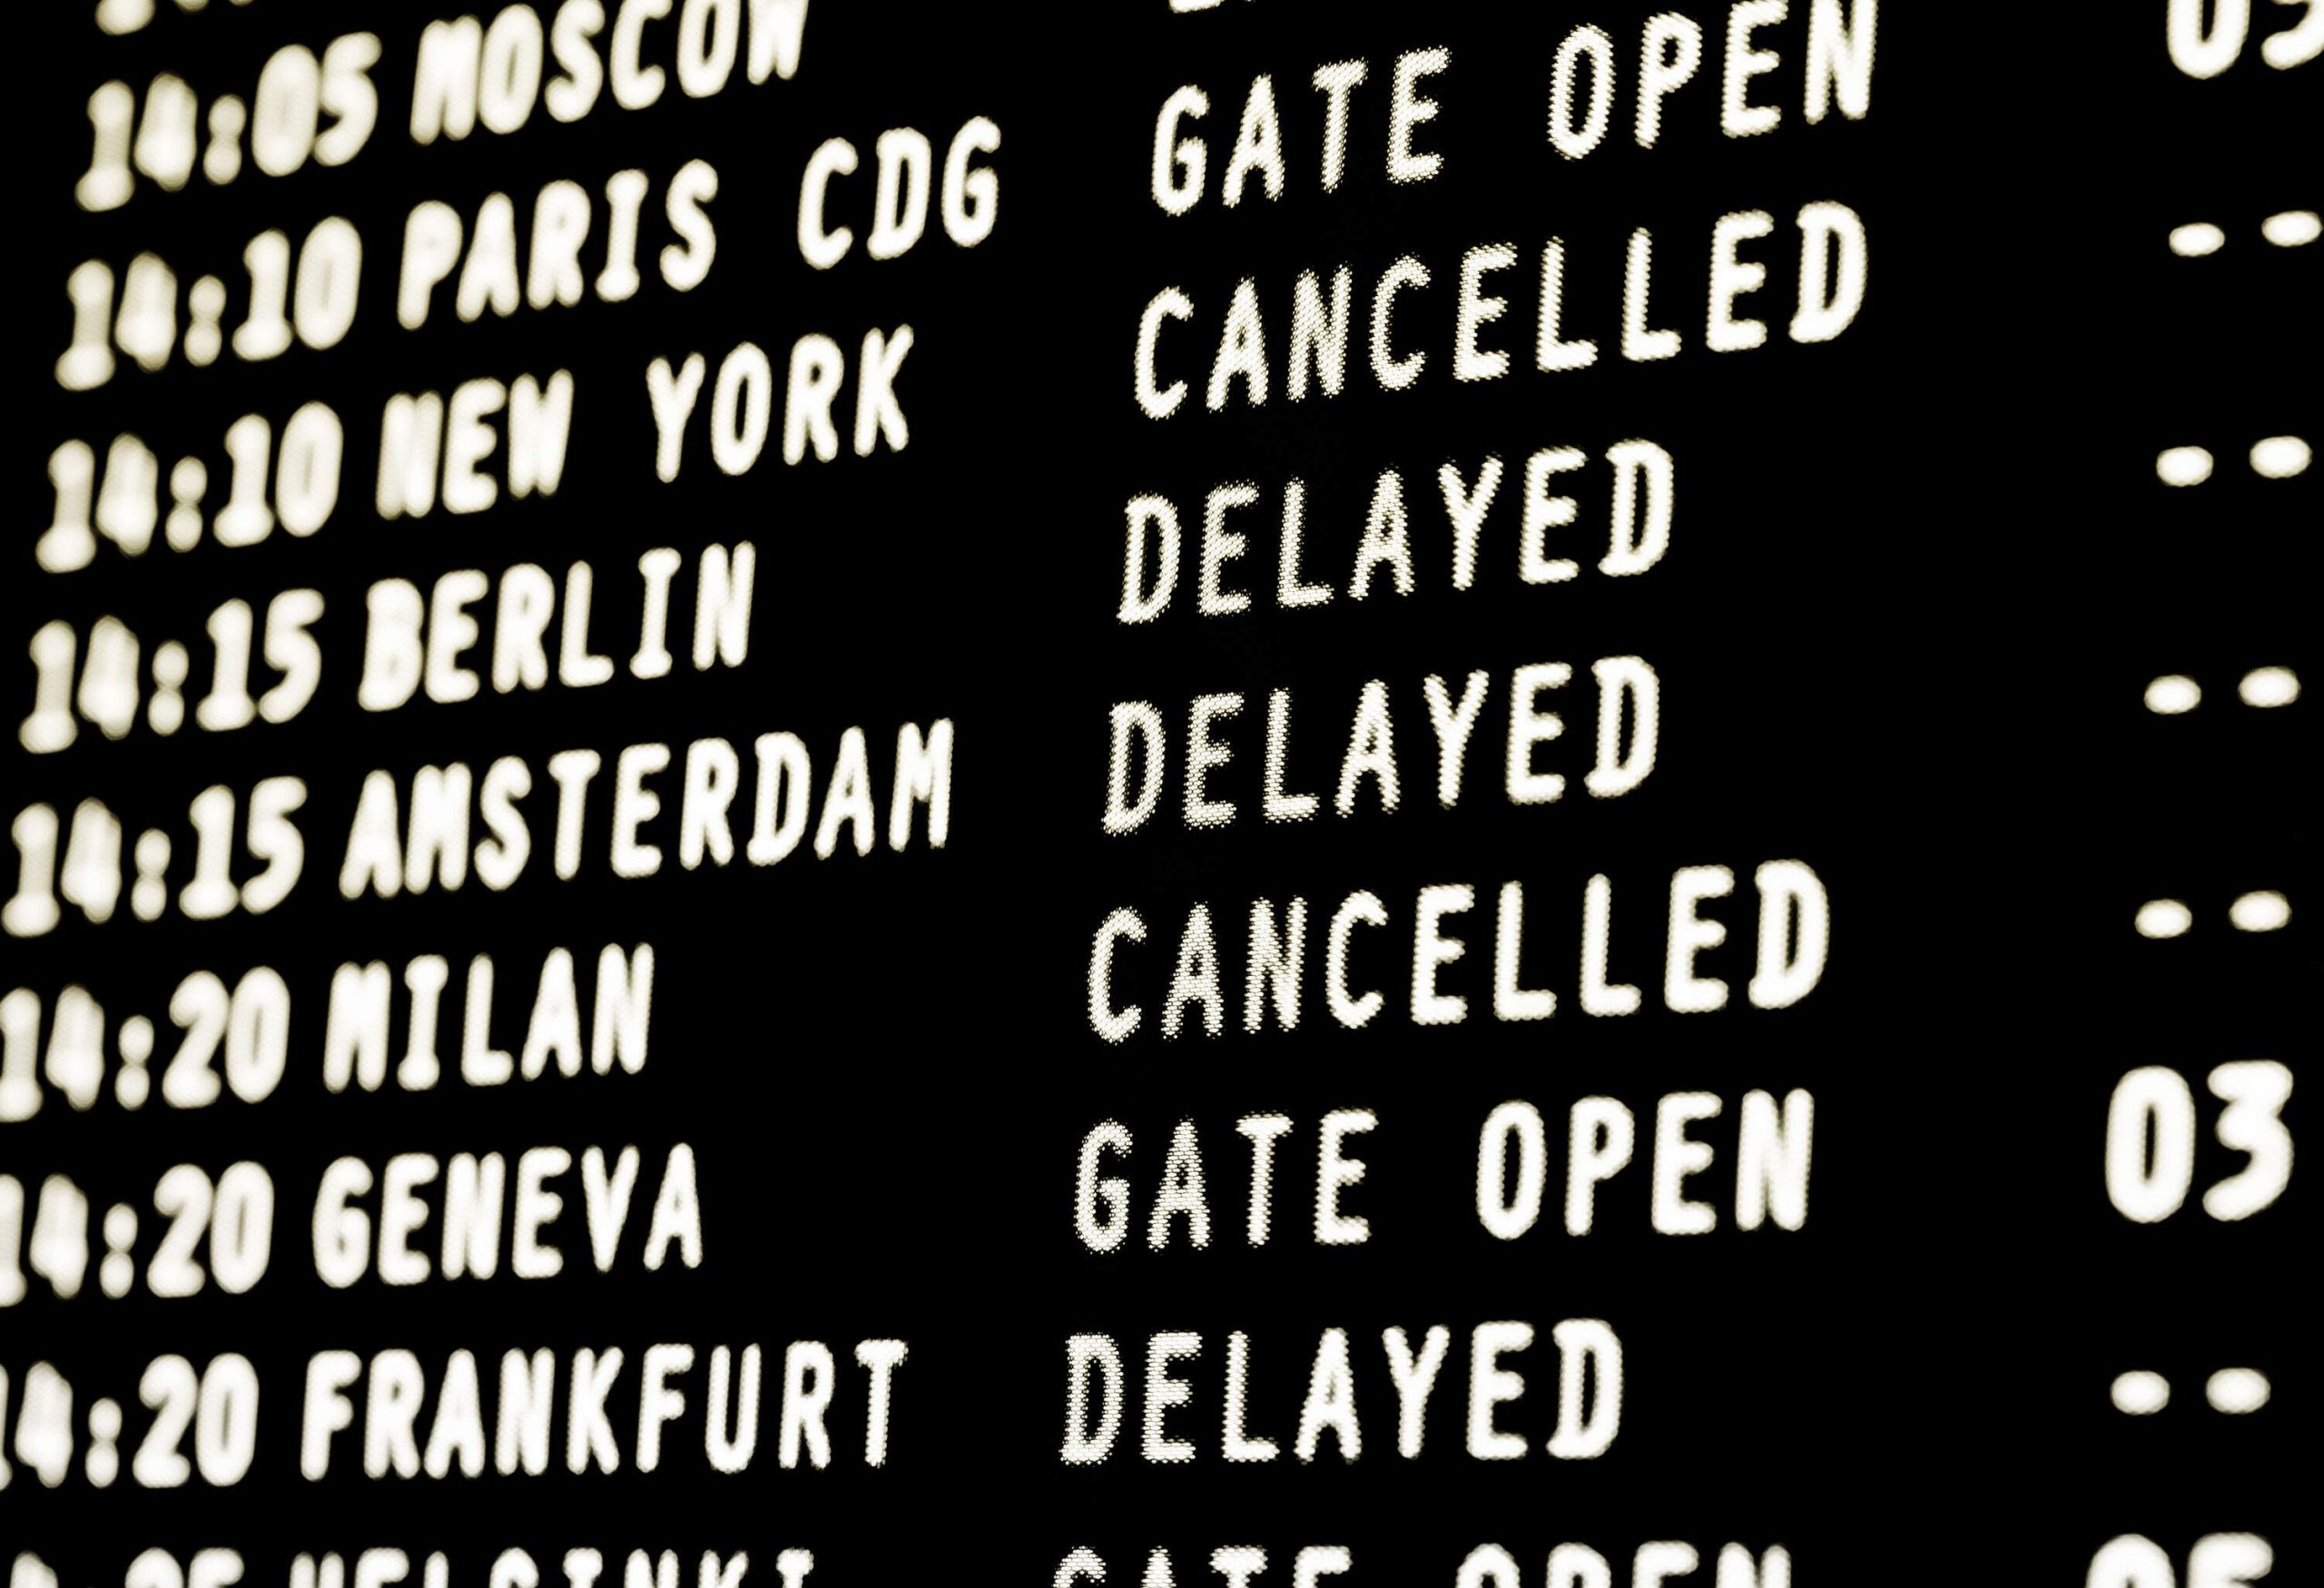 an airport information board